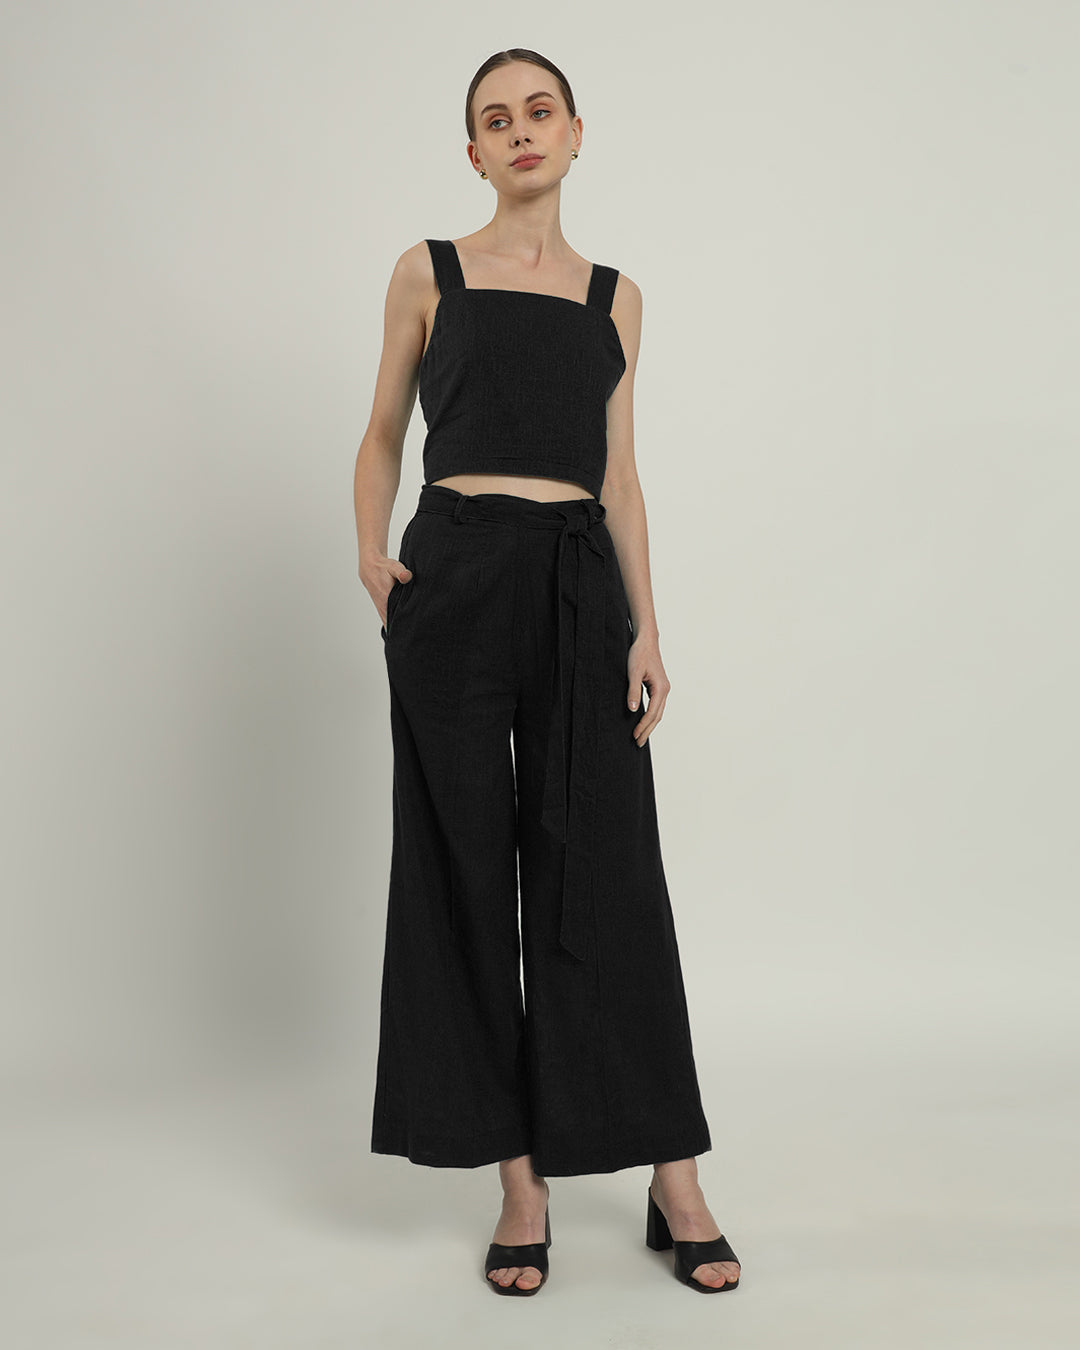 Noir Sleek Square Crop Solid Top (Without Bottoms)